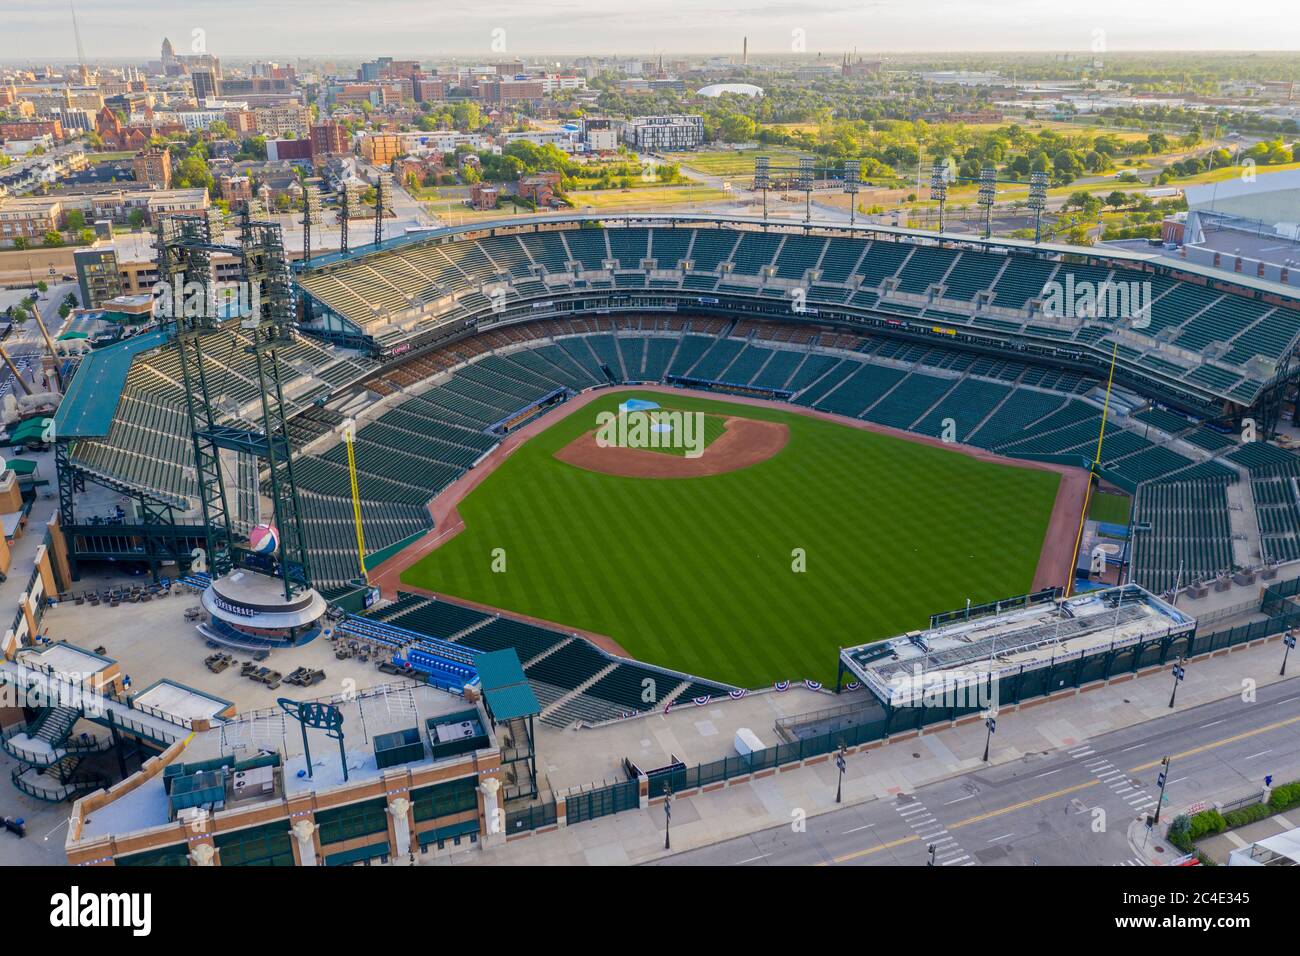 Detroit, Michigan - Comerica Park, home of the Detroit Tigers, is empty due to the coronavirus pandemic. Stock Photo